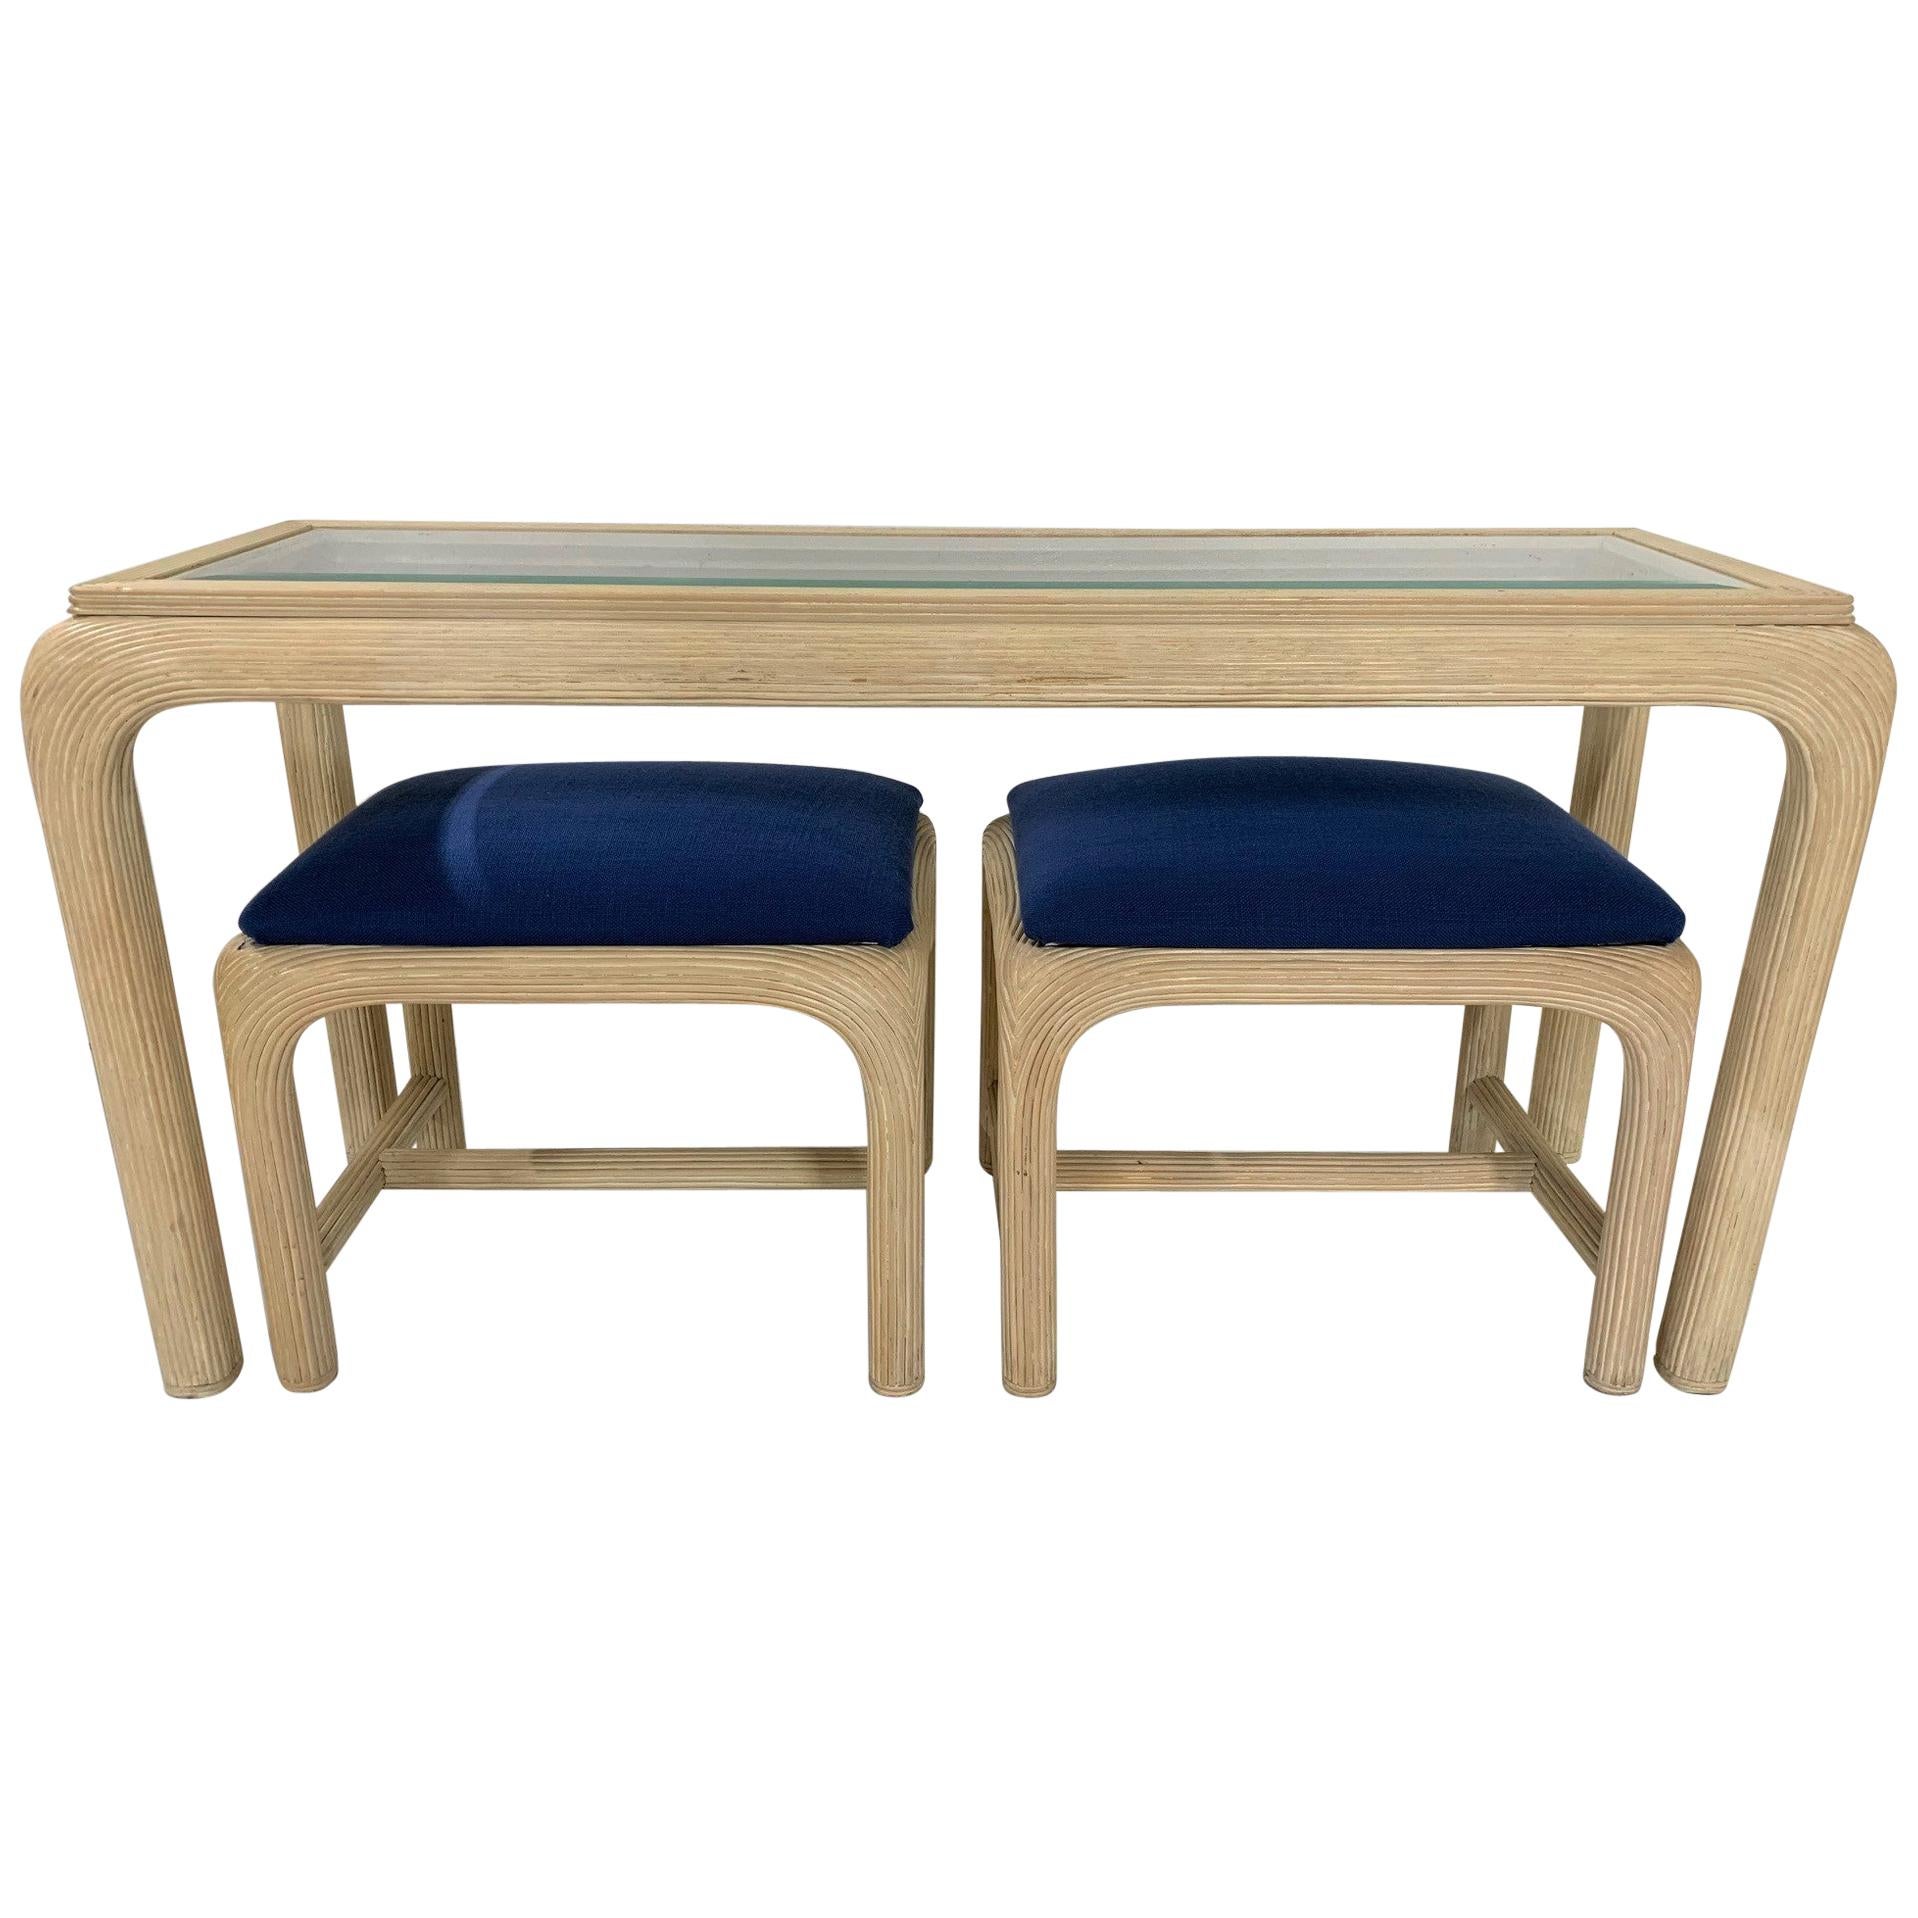 Modern Reed Console with Matching Benches For Sale